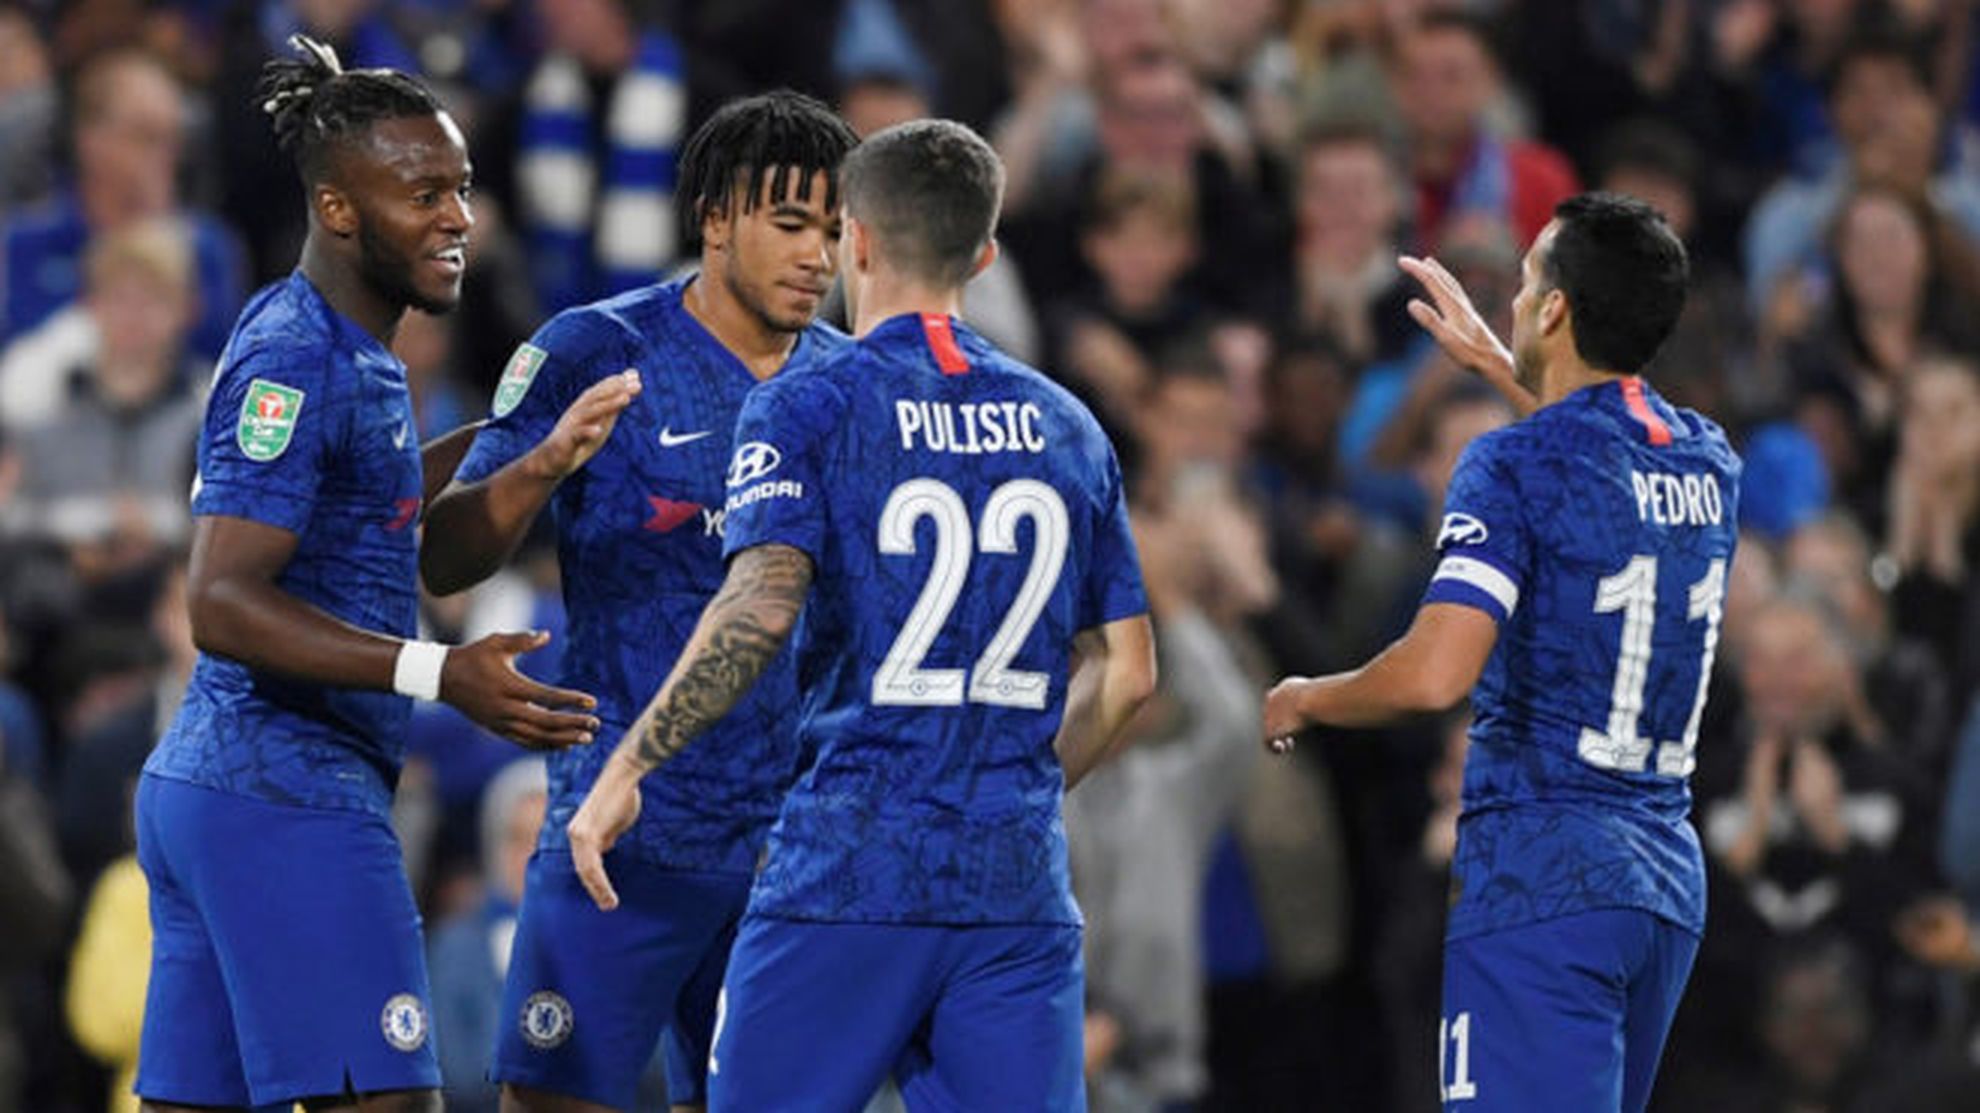 Chelsea vs Southampton in the Carabao Cup